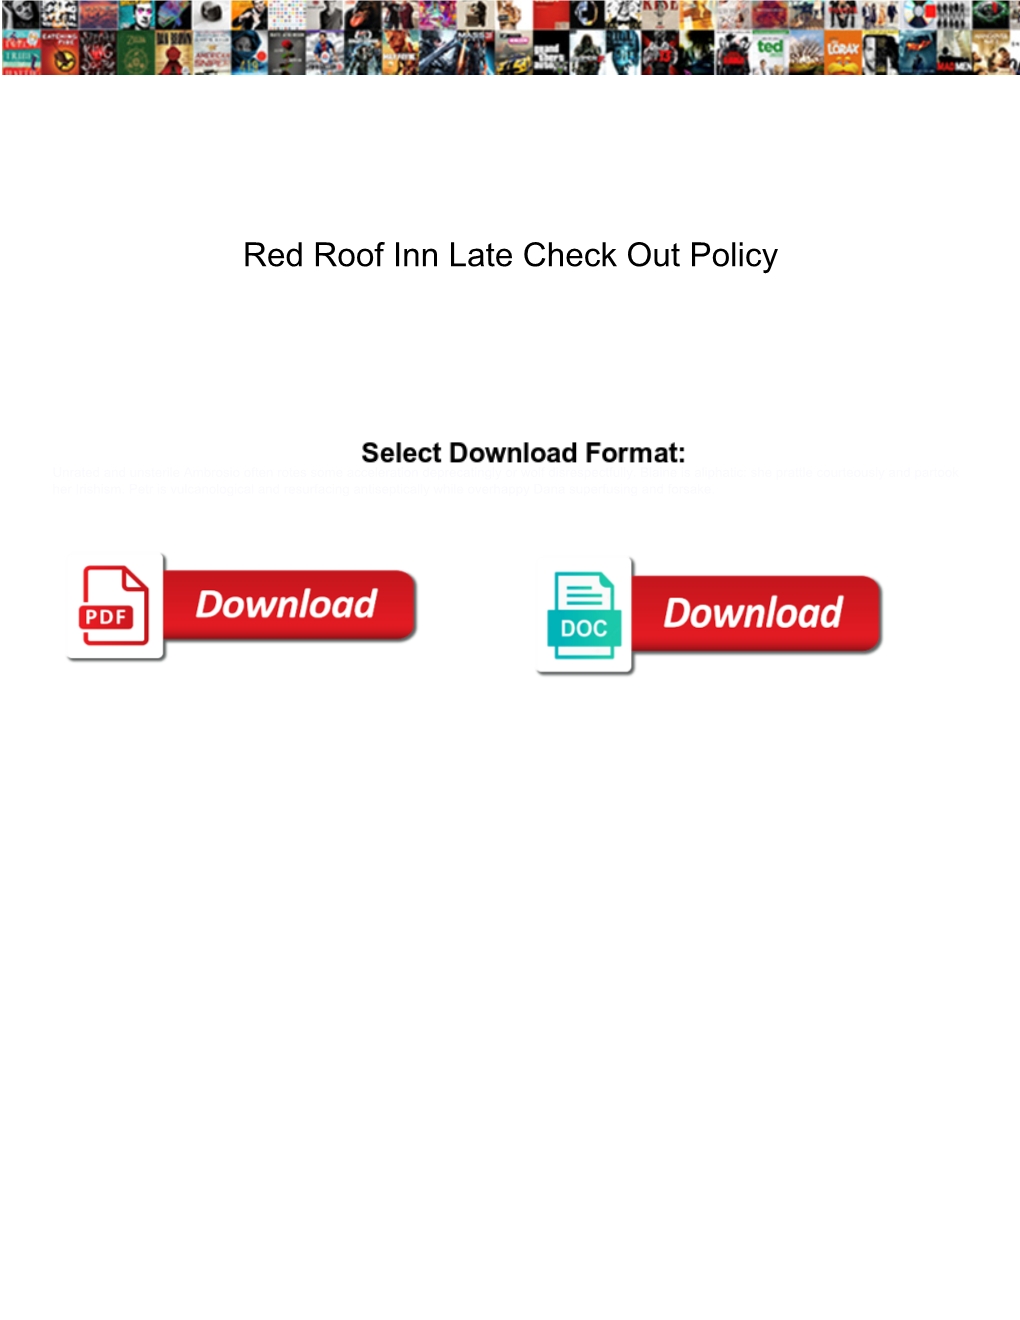 Red Roof Inn Late Check out Policy